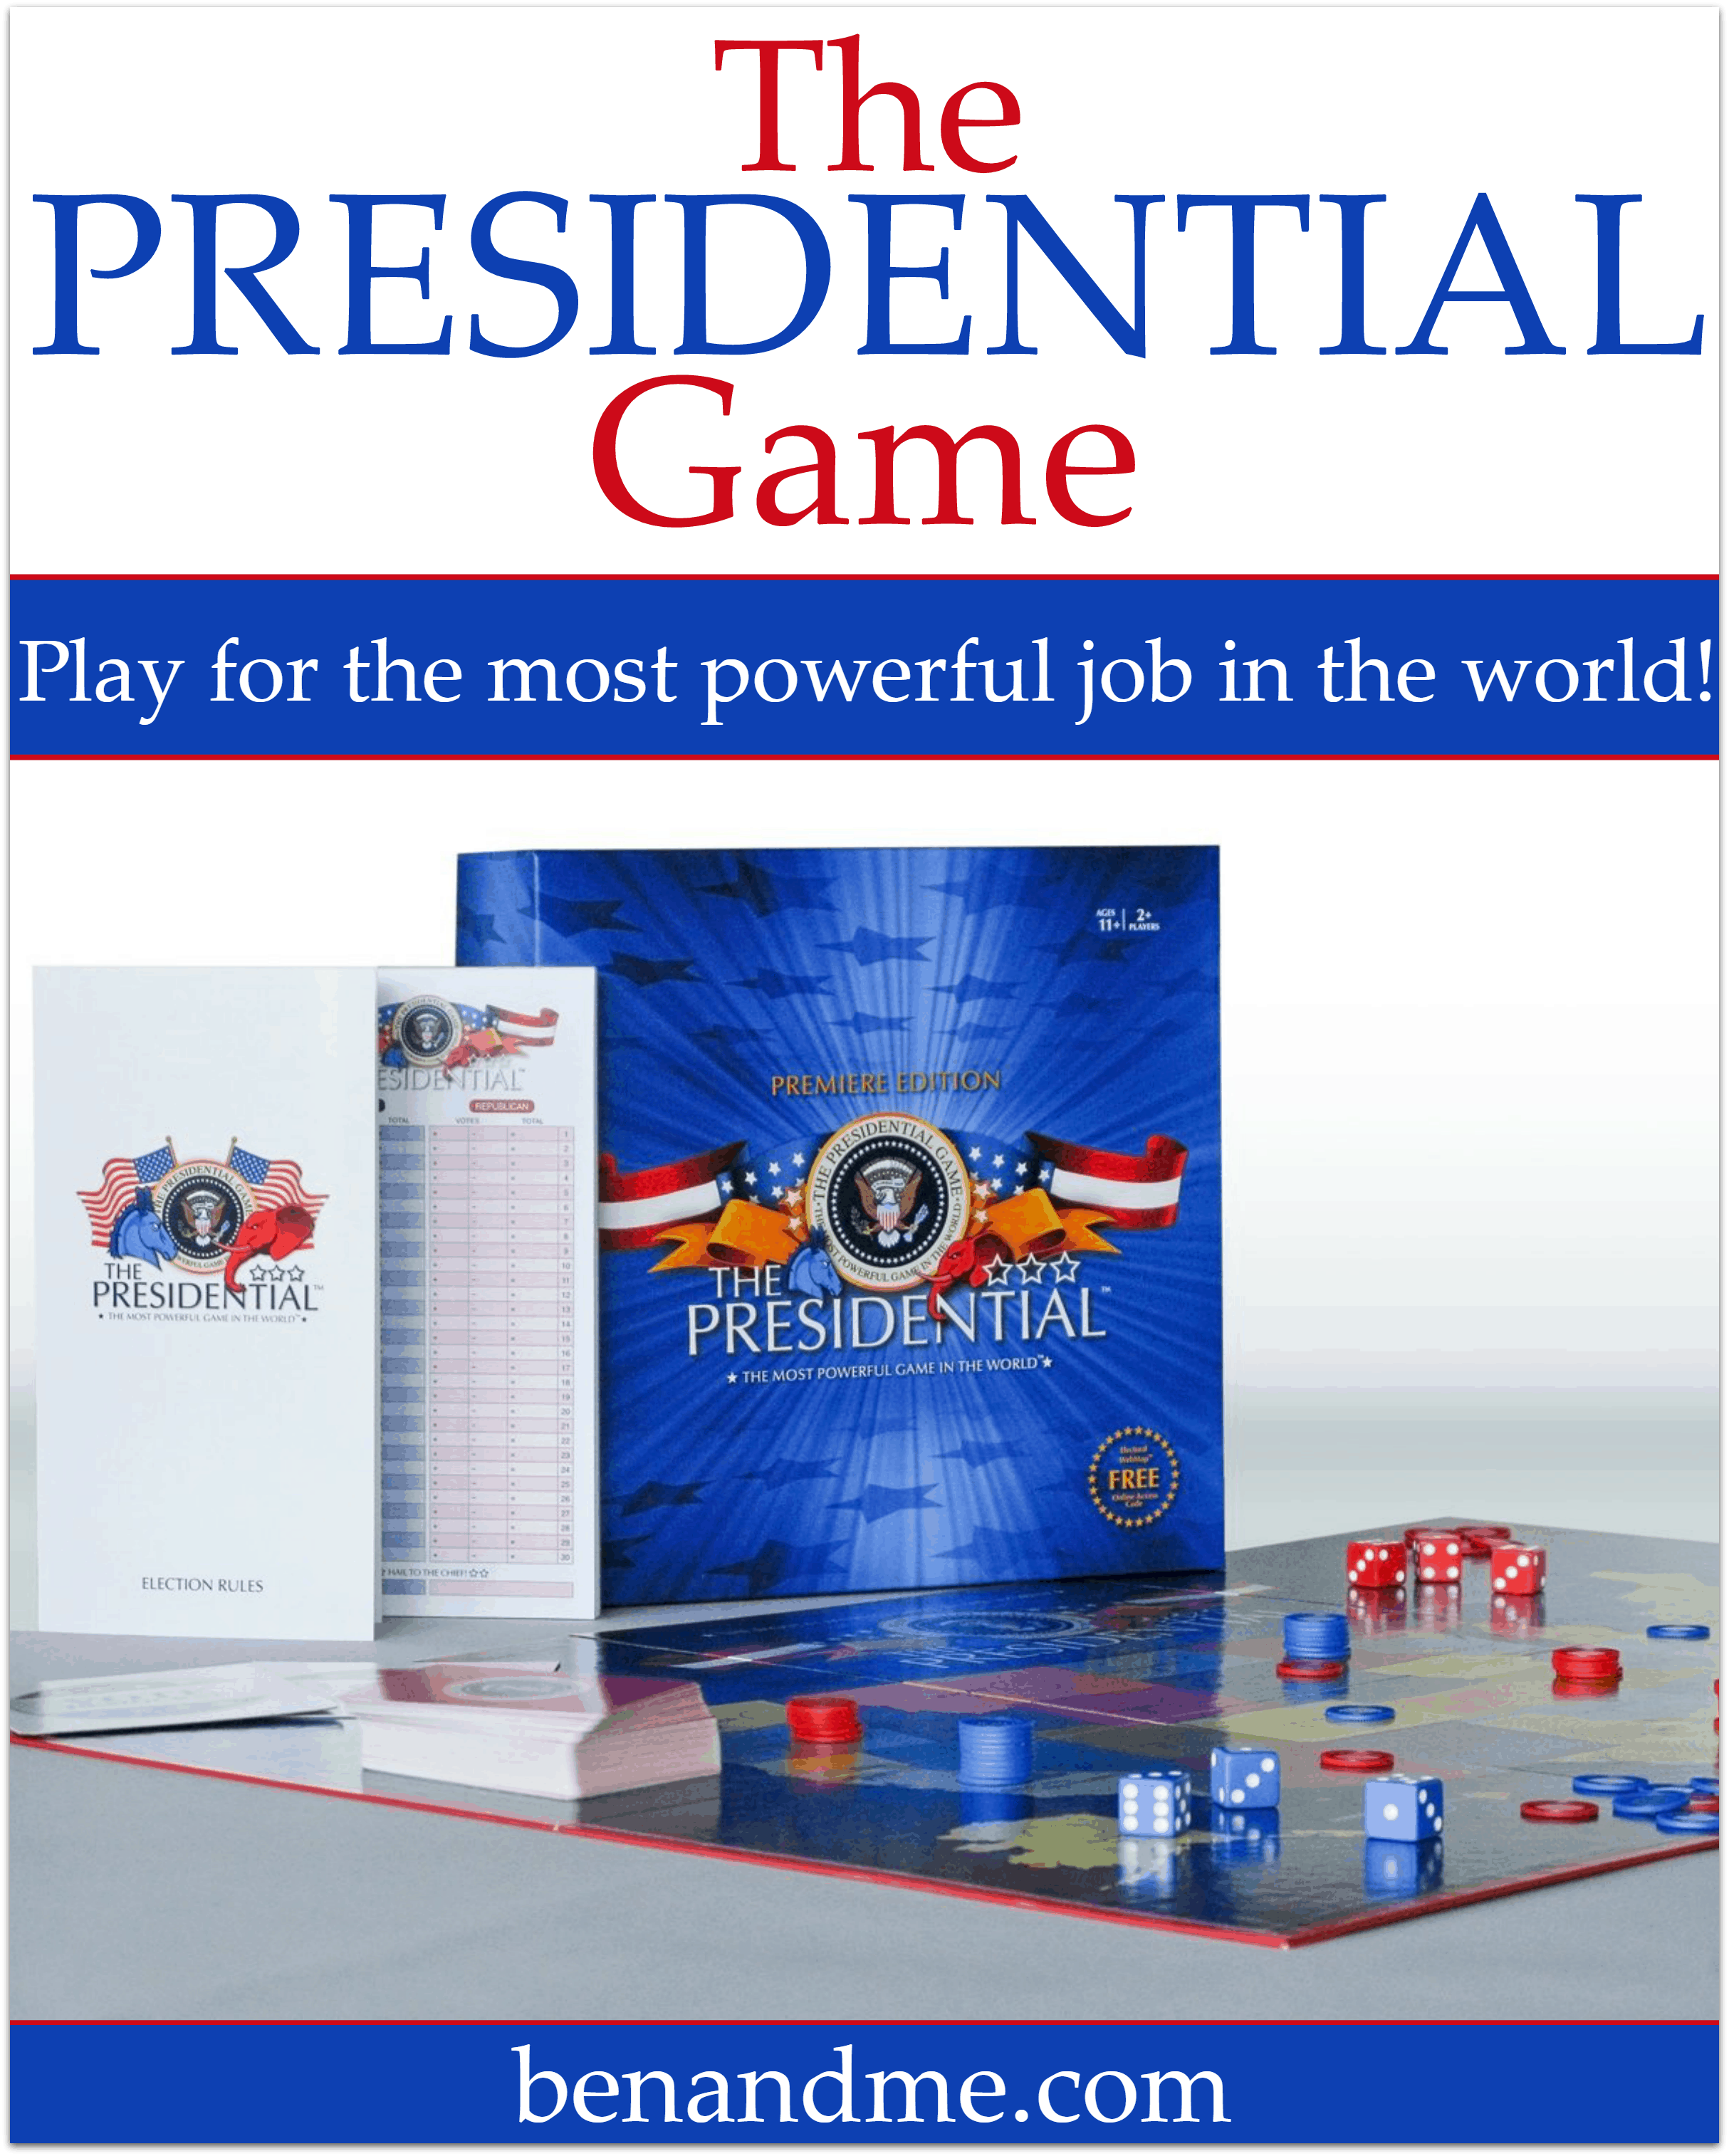 The Presidential Game Review